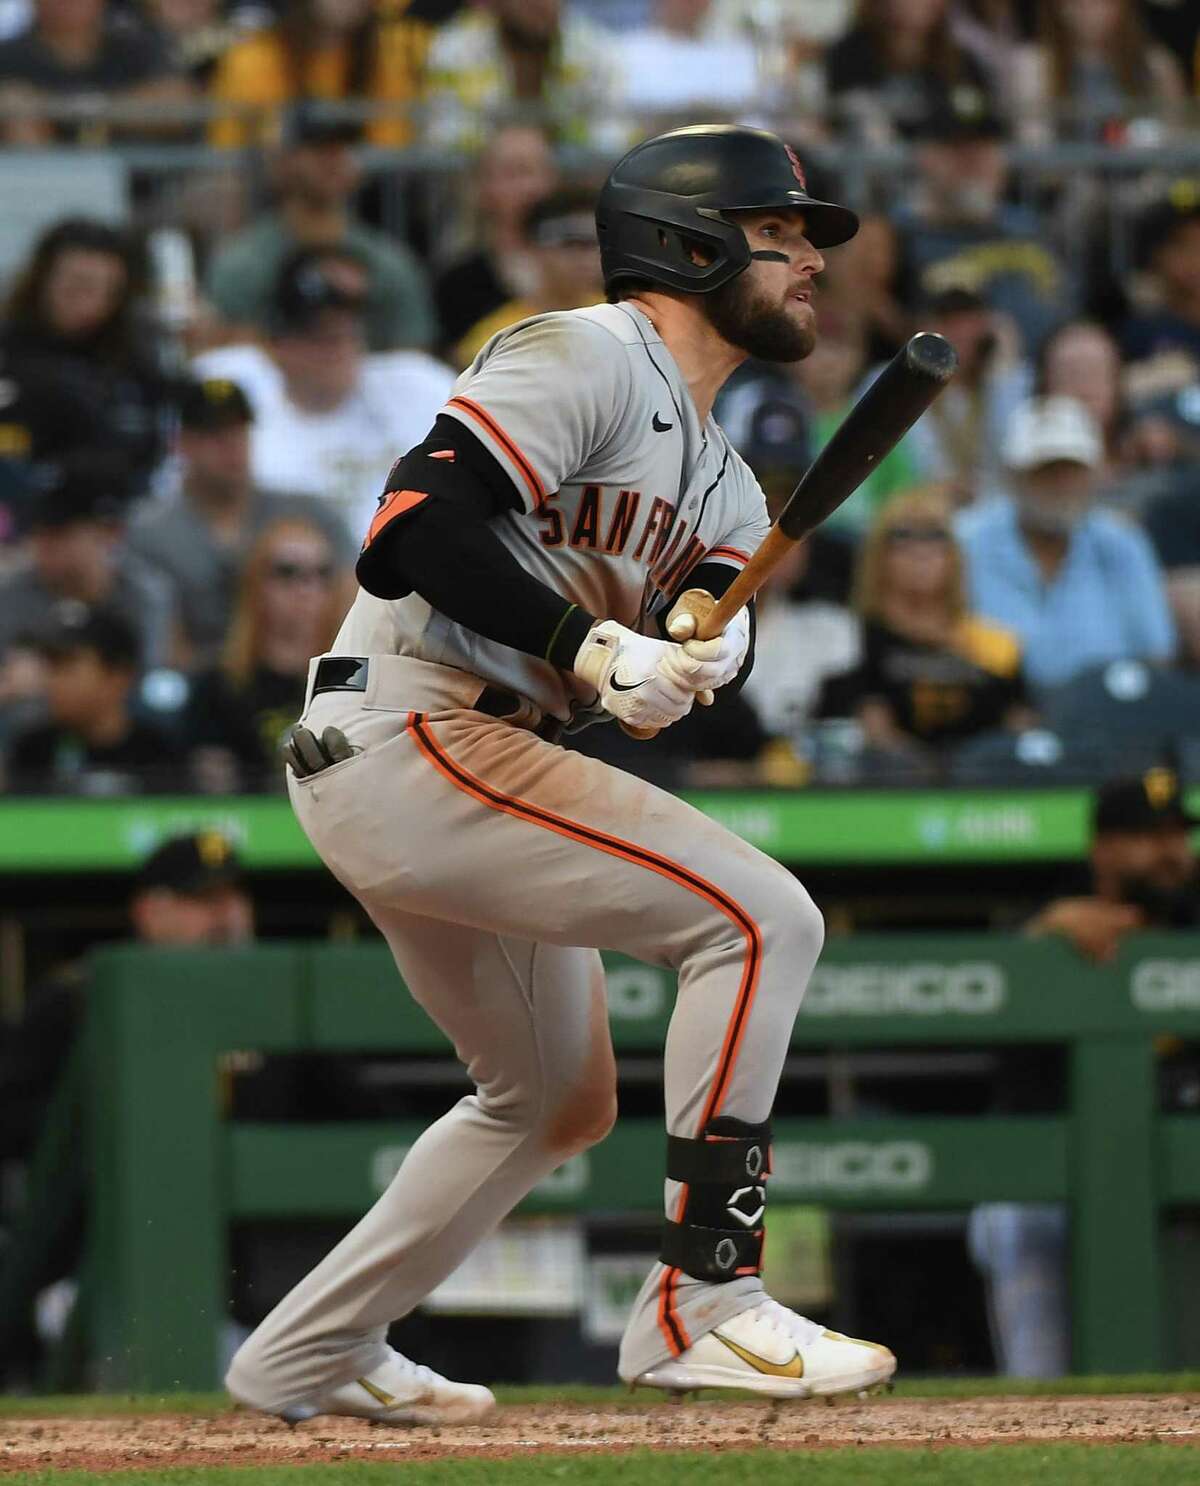 PITTSBURGH, PA - JUNE 18: Luis Gonzalez #51 of the San Francisco Giants hits an RBI double to center field in the seventh inning during the game against the Pittsburgh Pirates at PNC Park on June 18, 2022 in Pittsburgh, Pennsylvania. (Photo by Justin Berl/Getty Images)